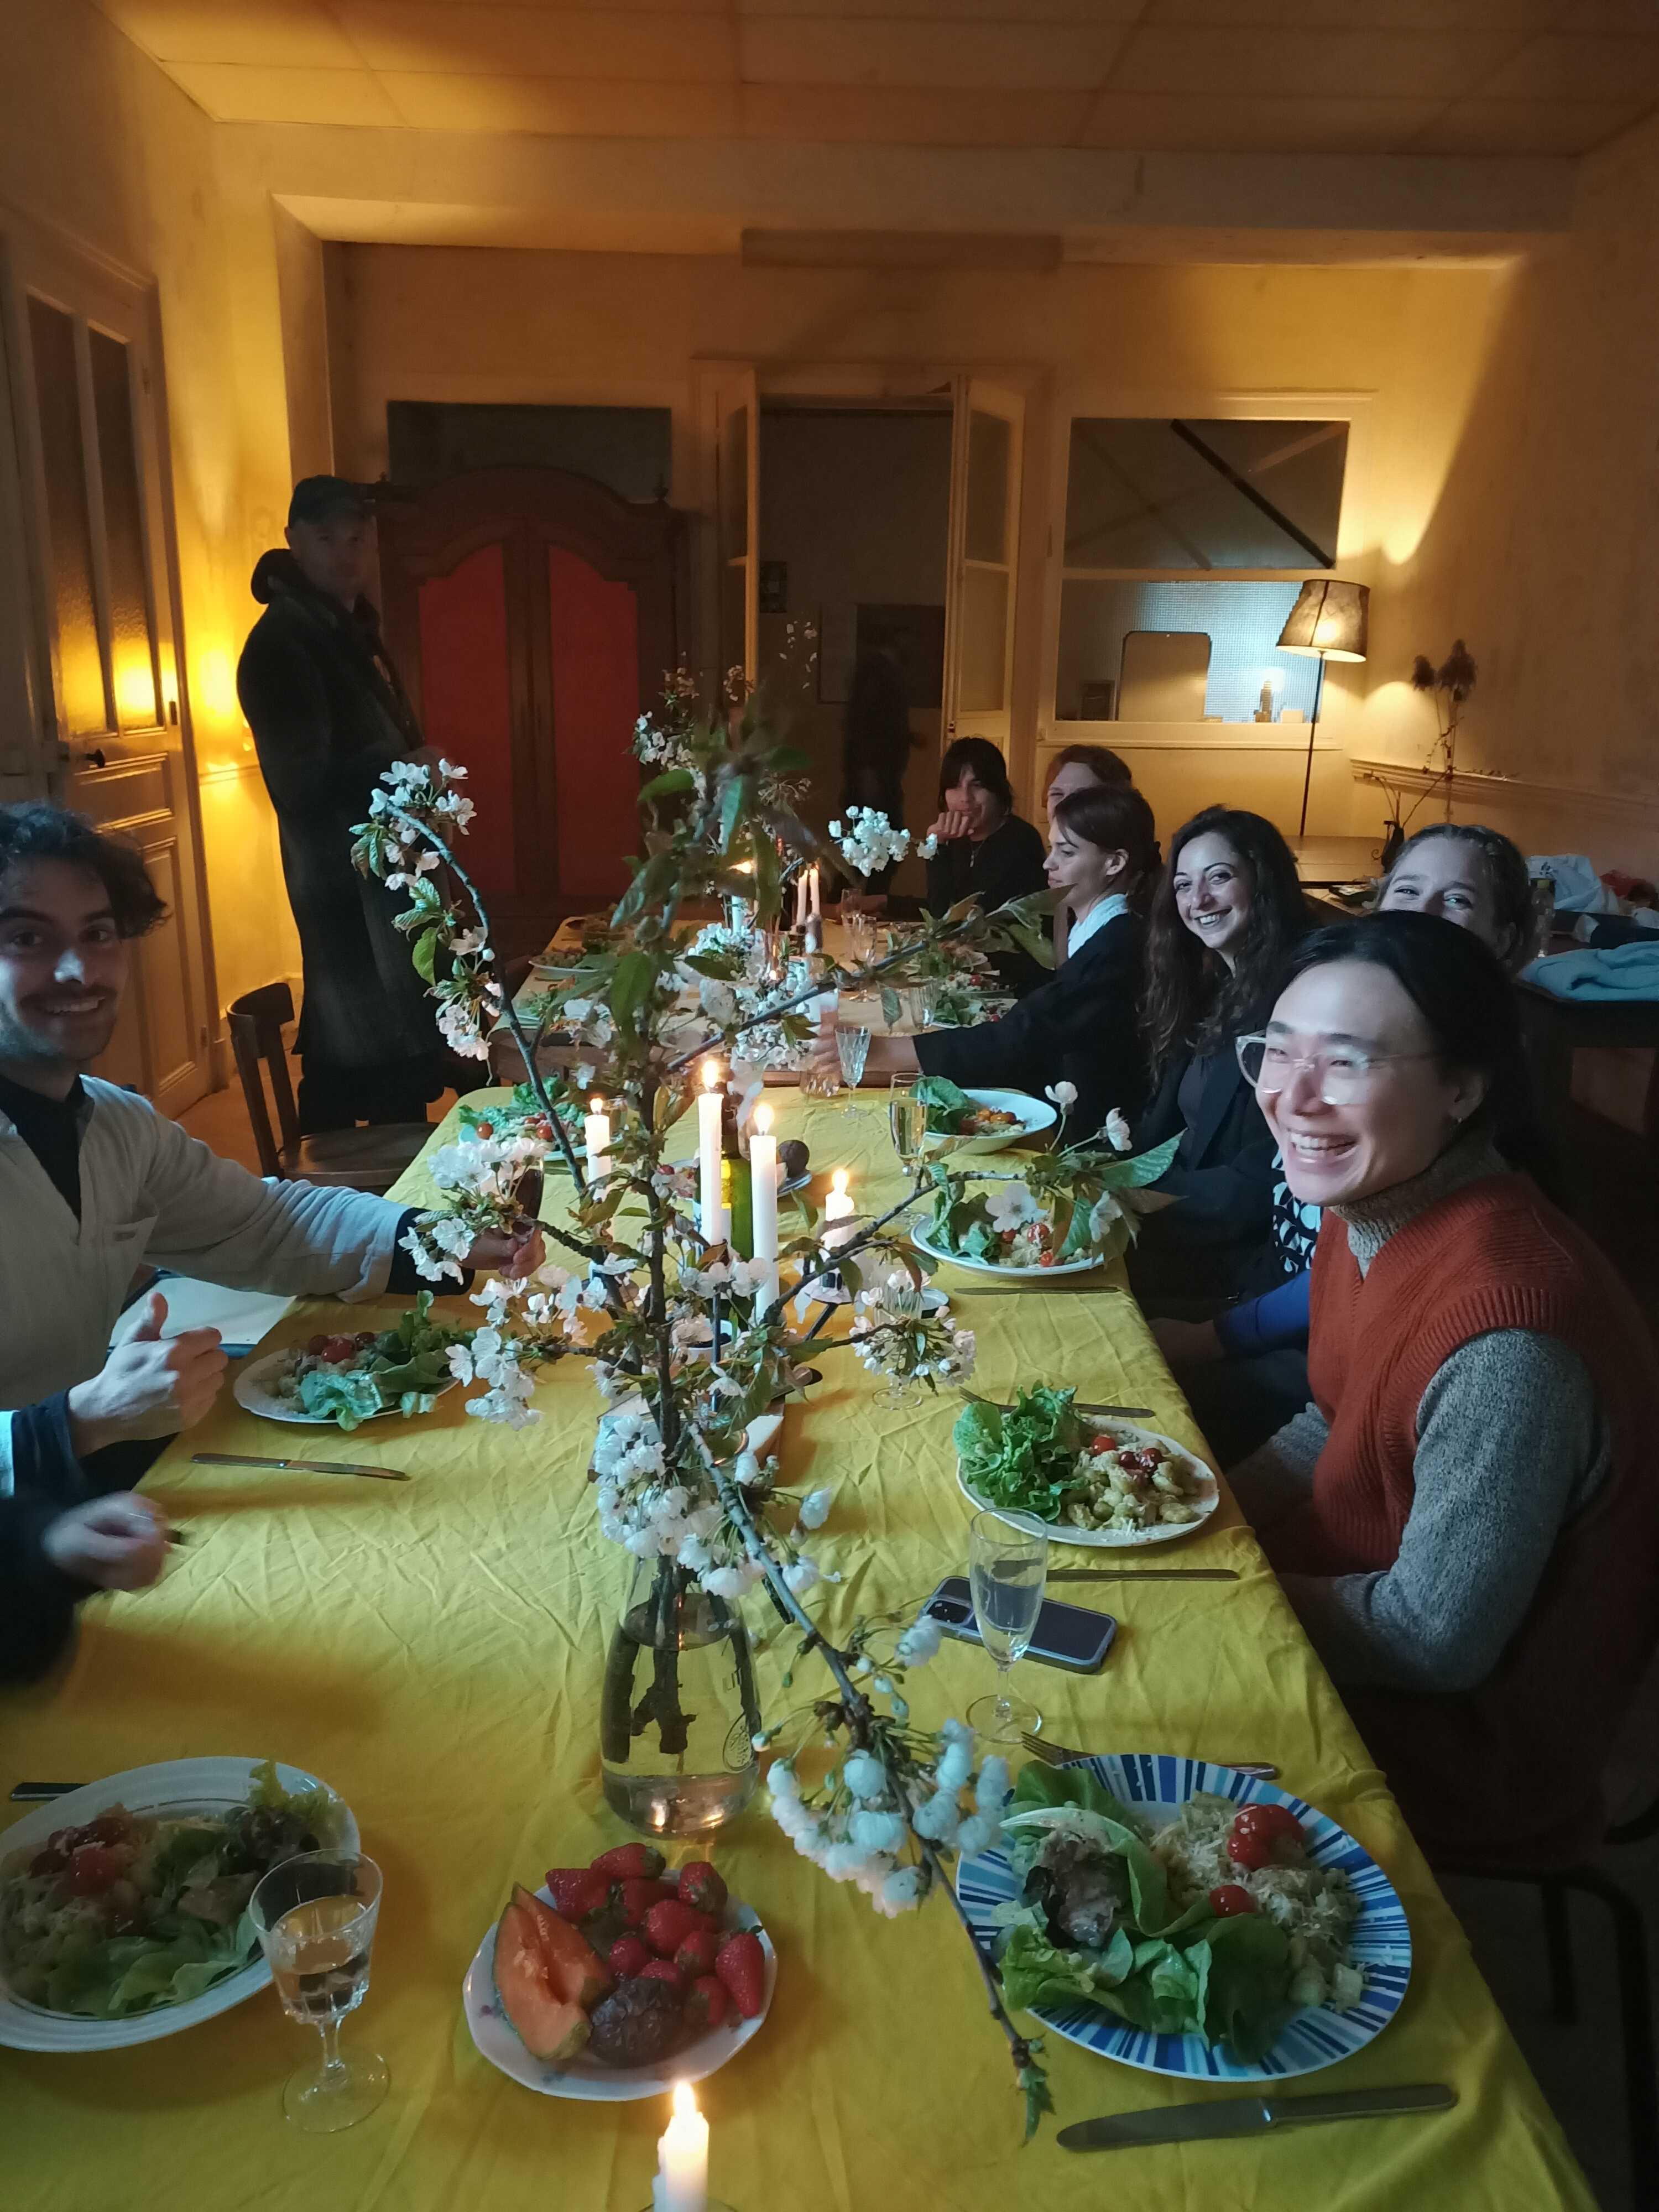 COUNCIL dinner-meeting of 15 April, 2023 to say thanks to Theresa Zwerschke, Cornelia Isaksson and Iliada Charalampous (COUNCIL team 22-23) and to welcome Elif Cadoux, Noam Youngrak Son and Dalia Maini (COUNCIL team 23 -24). Table layed and decorated by Kastė Šeškevičiūtė in the Living Room at PAF, St. Erme. Photo: Gabriëlle Schleijpen.